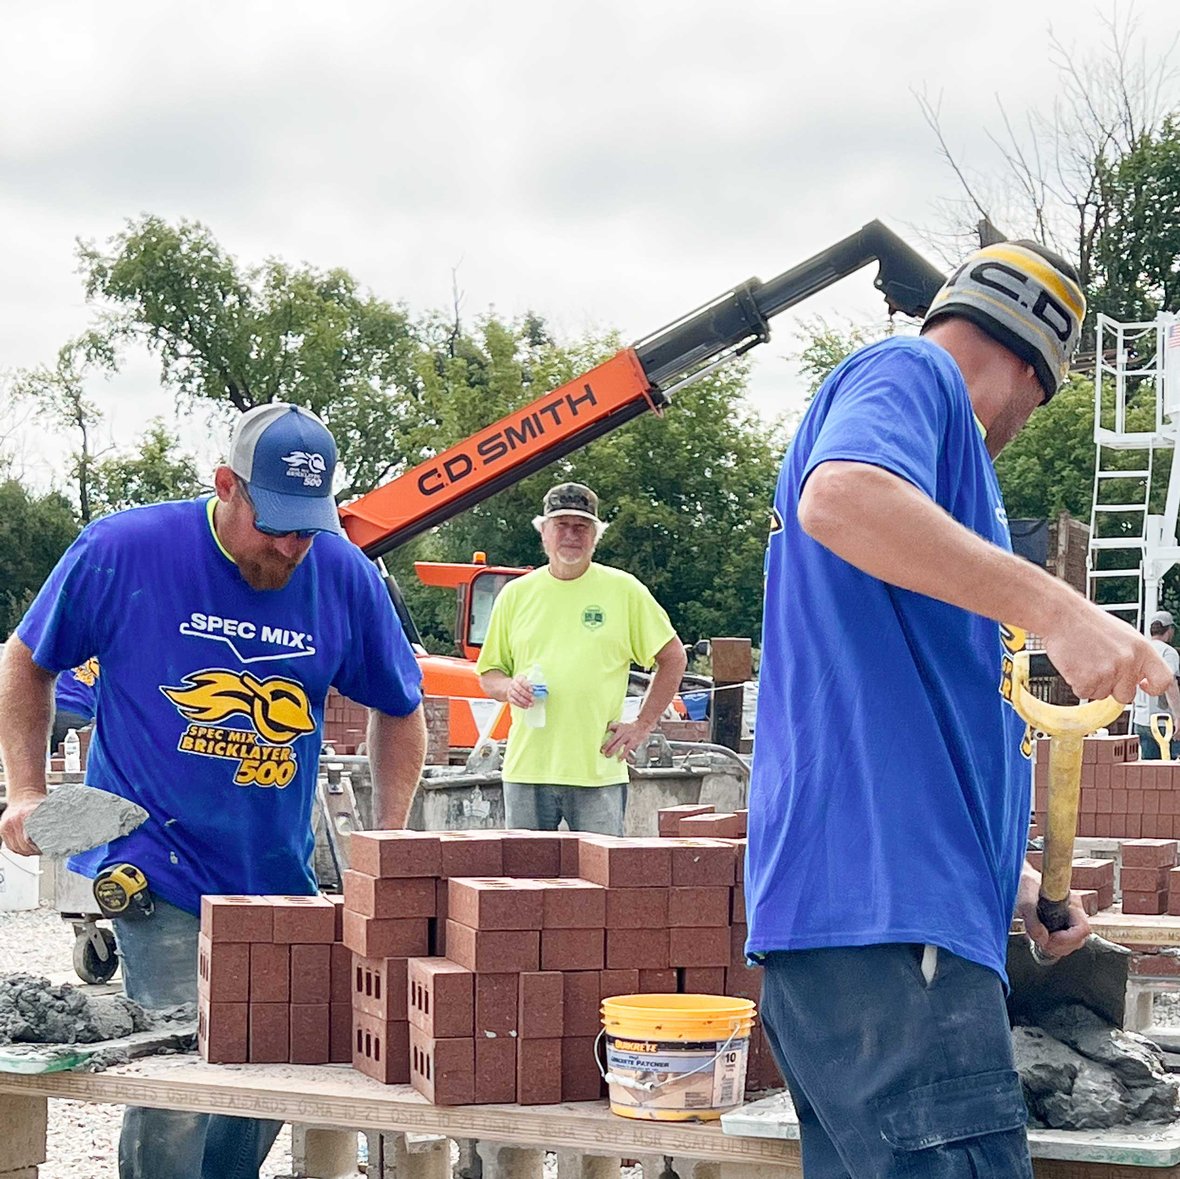 C.D. Smith Masonry Construction Team competing in the 2022 SPEC MIX BRICKLAYER 500 Regional Series at Fond du Lac Stone 